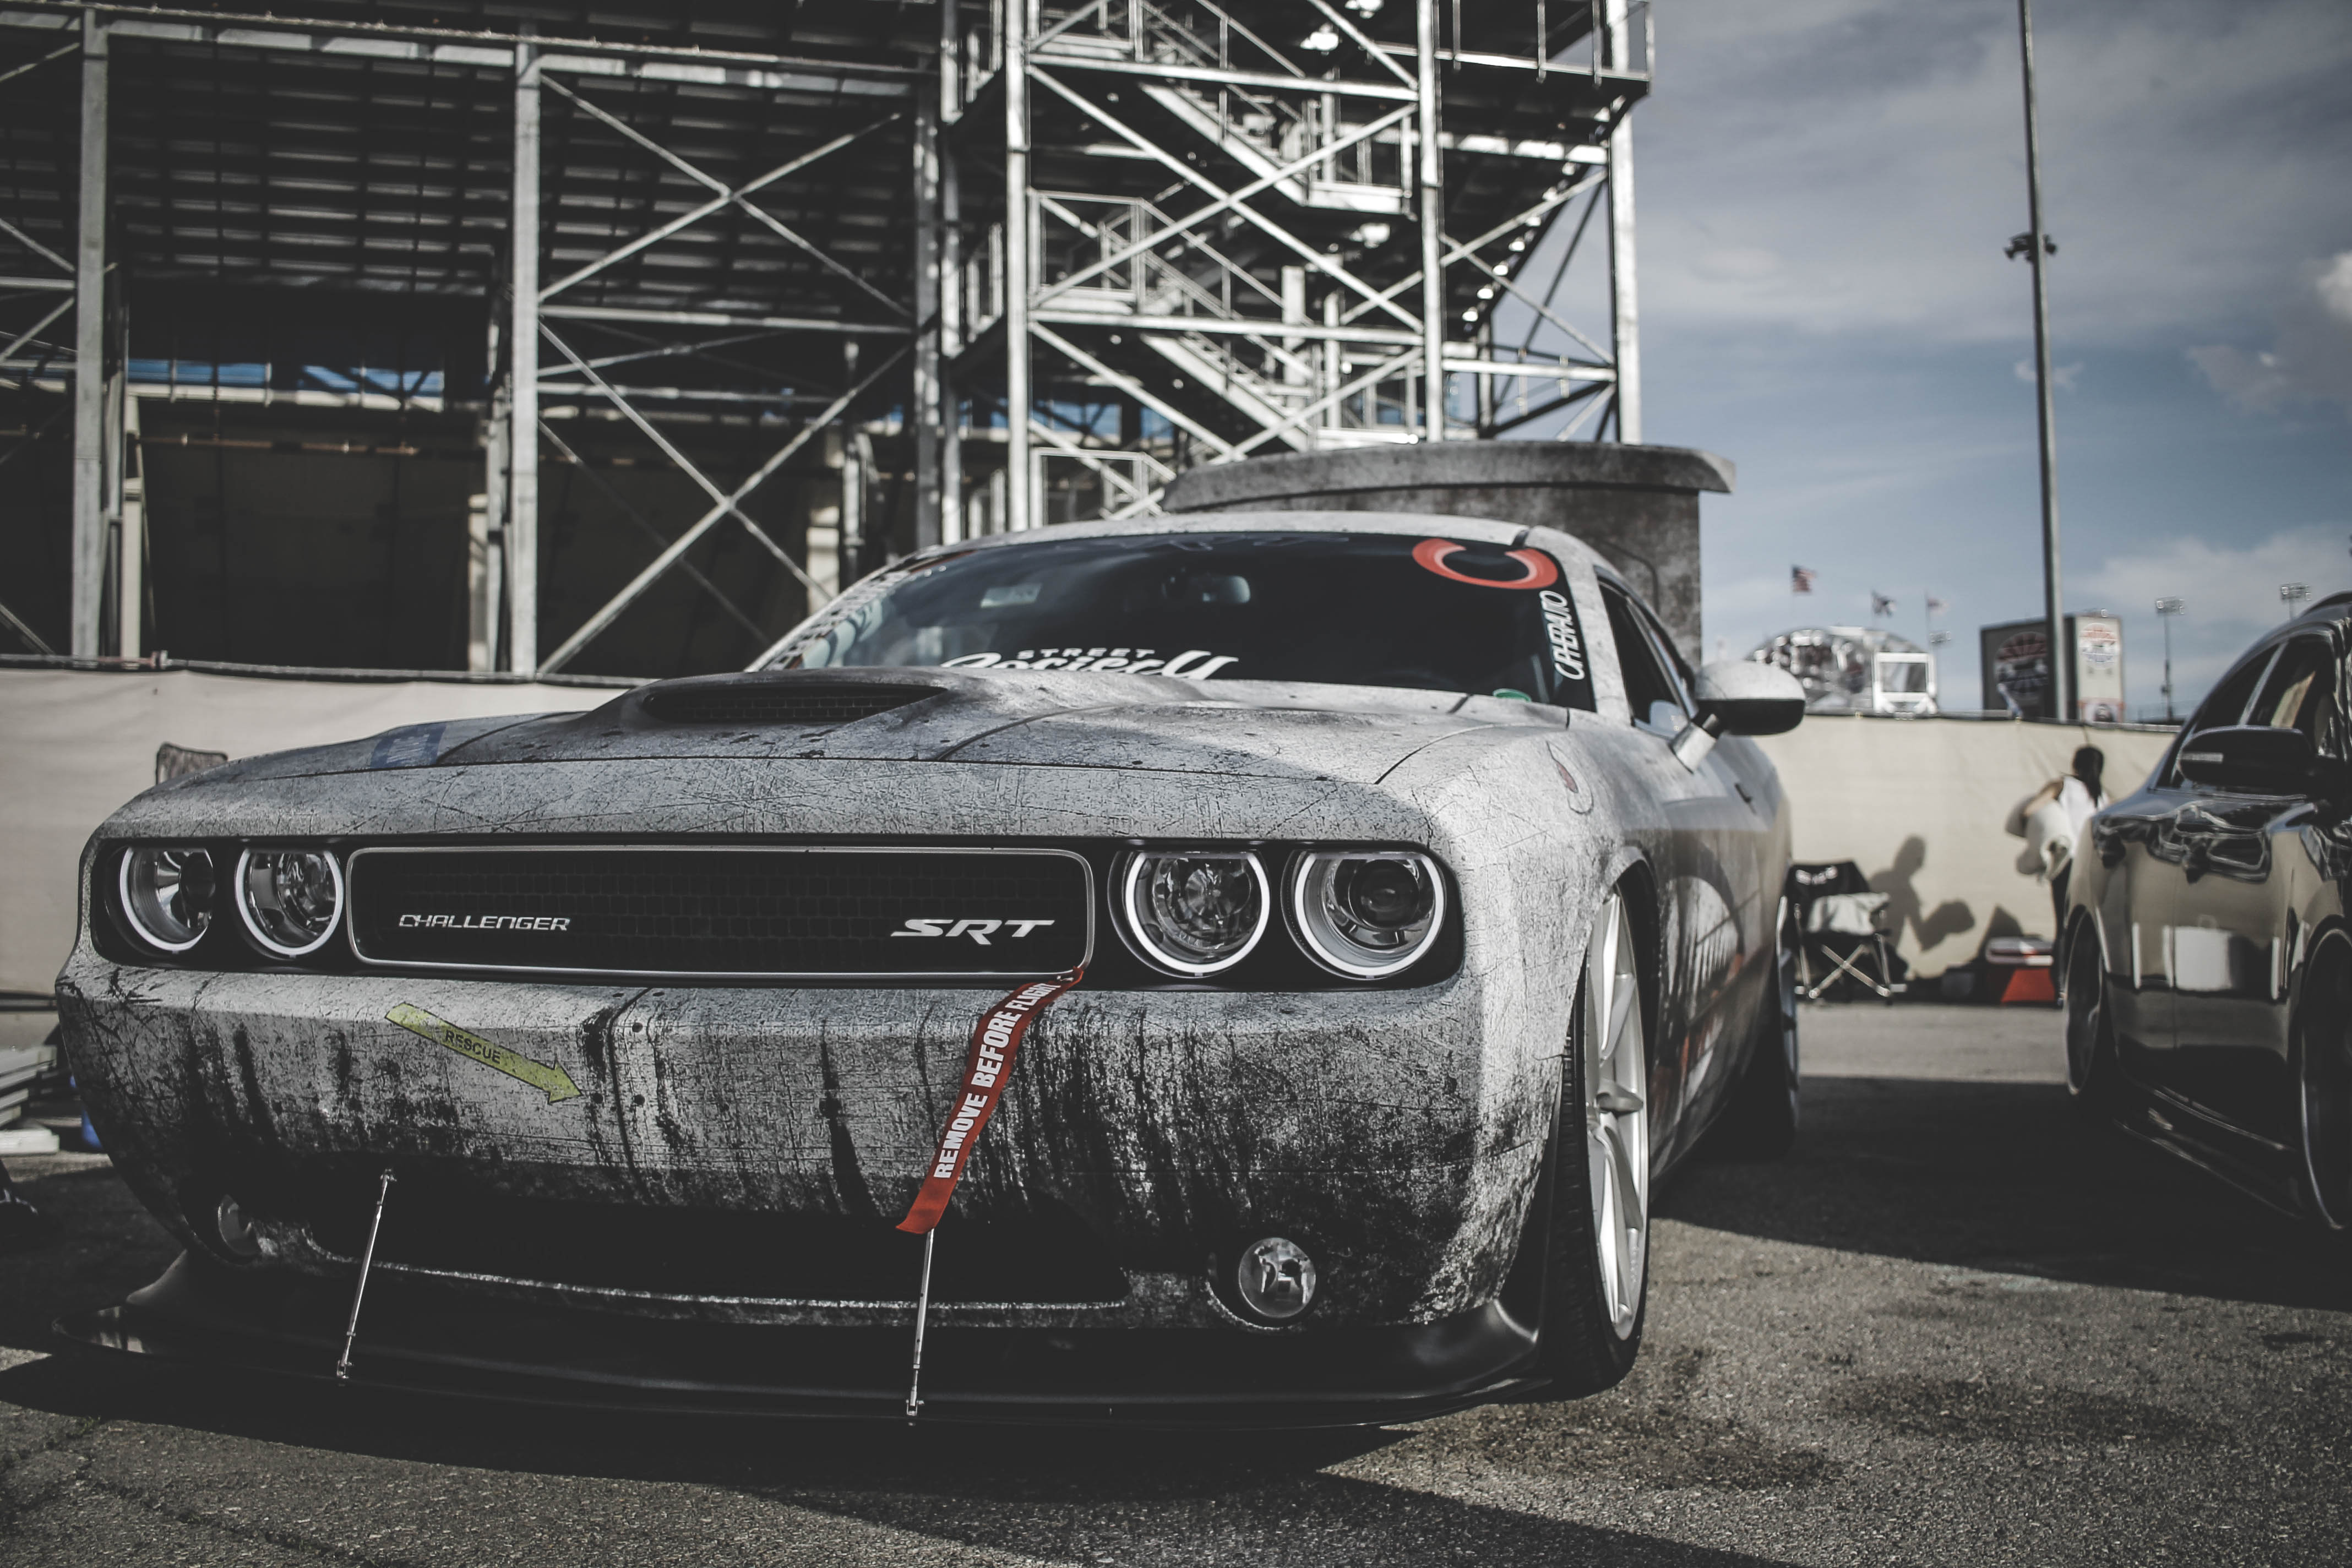 dodge, sports car, cars, challenger Dodge Challenger Cellphone FHD pic